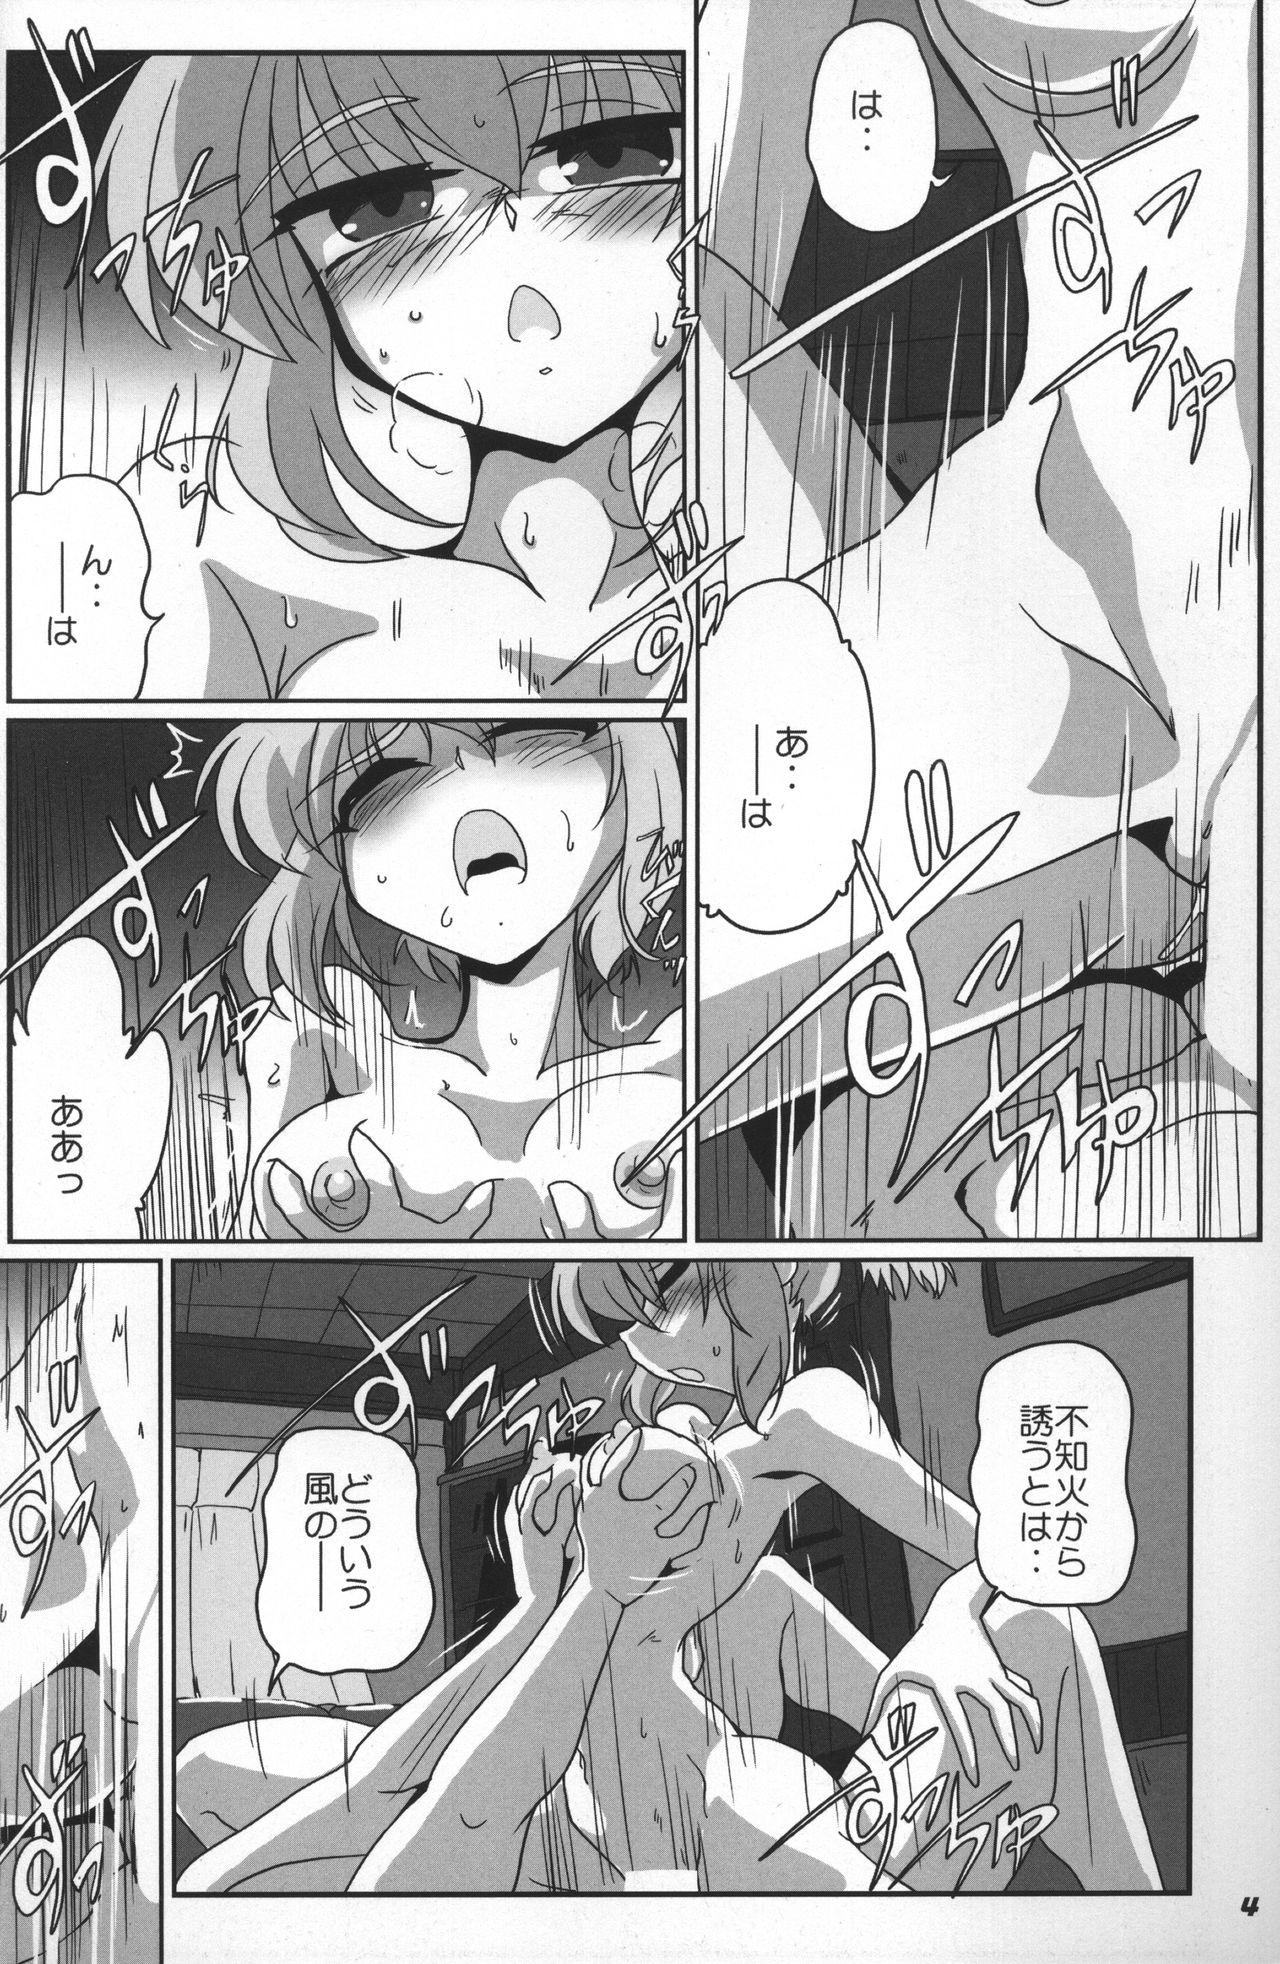 Lolicon KAN-COLLE N+ YAGGY kai - Kantai collection Rubia - Page 5